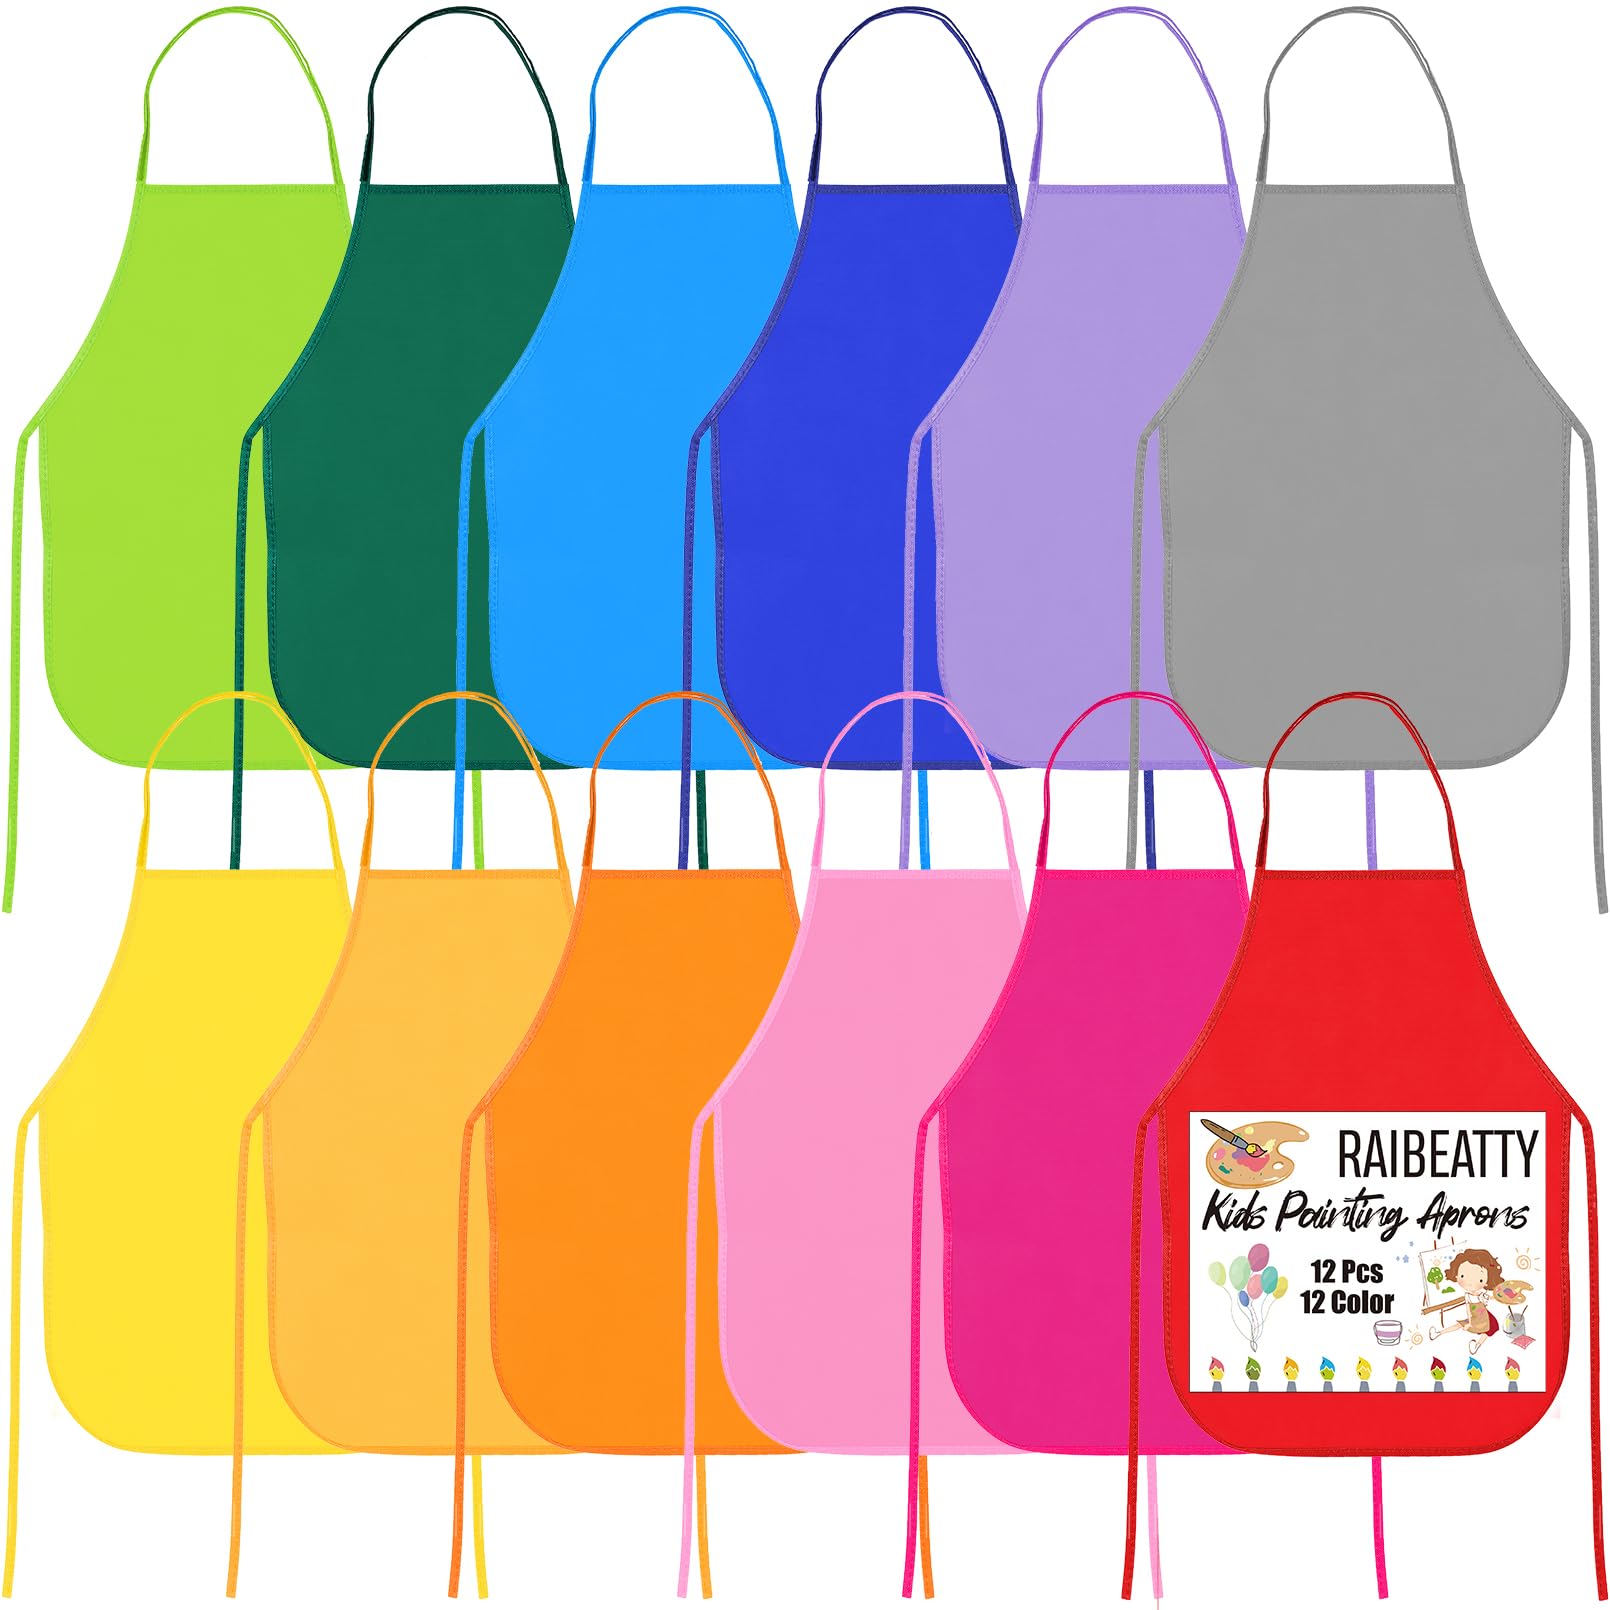 Buy RAIBEATTY 12 Pieces Kids Painting Aprons,12 Colors Paint Apron for Kids,Children  Painting Aprons,Children's Artists Fabric Aprons,Kids Aprons for Kitchen  Classroom,Party,Crafts & Art Painting Activity